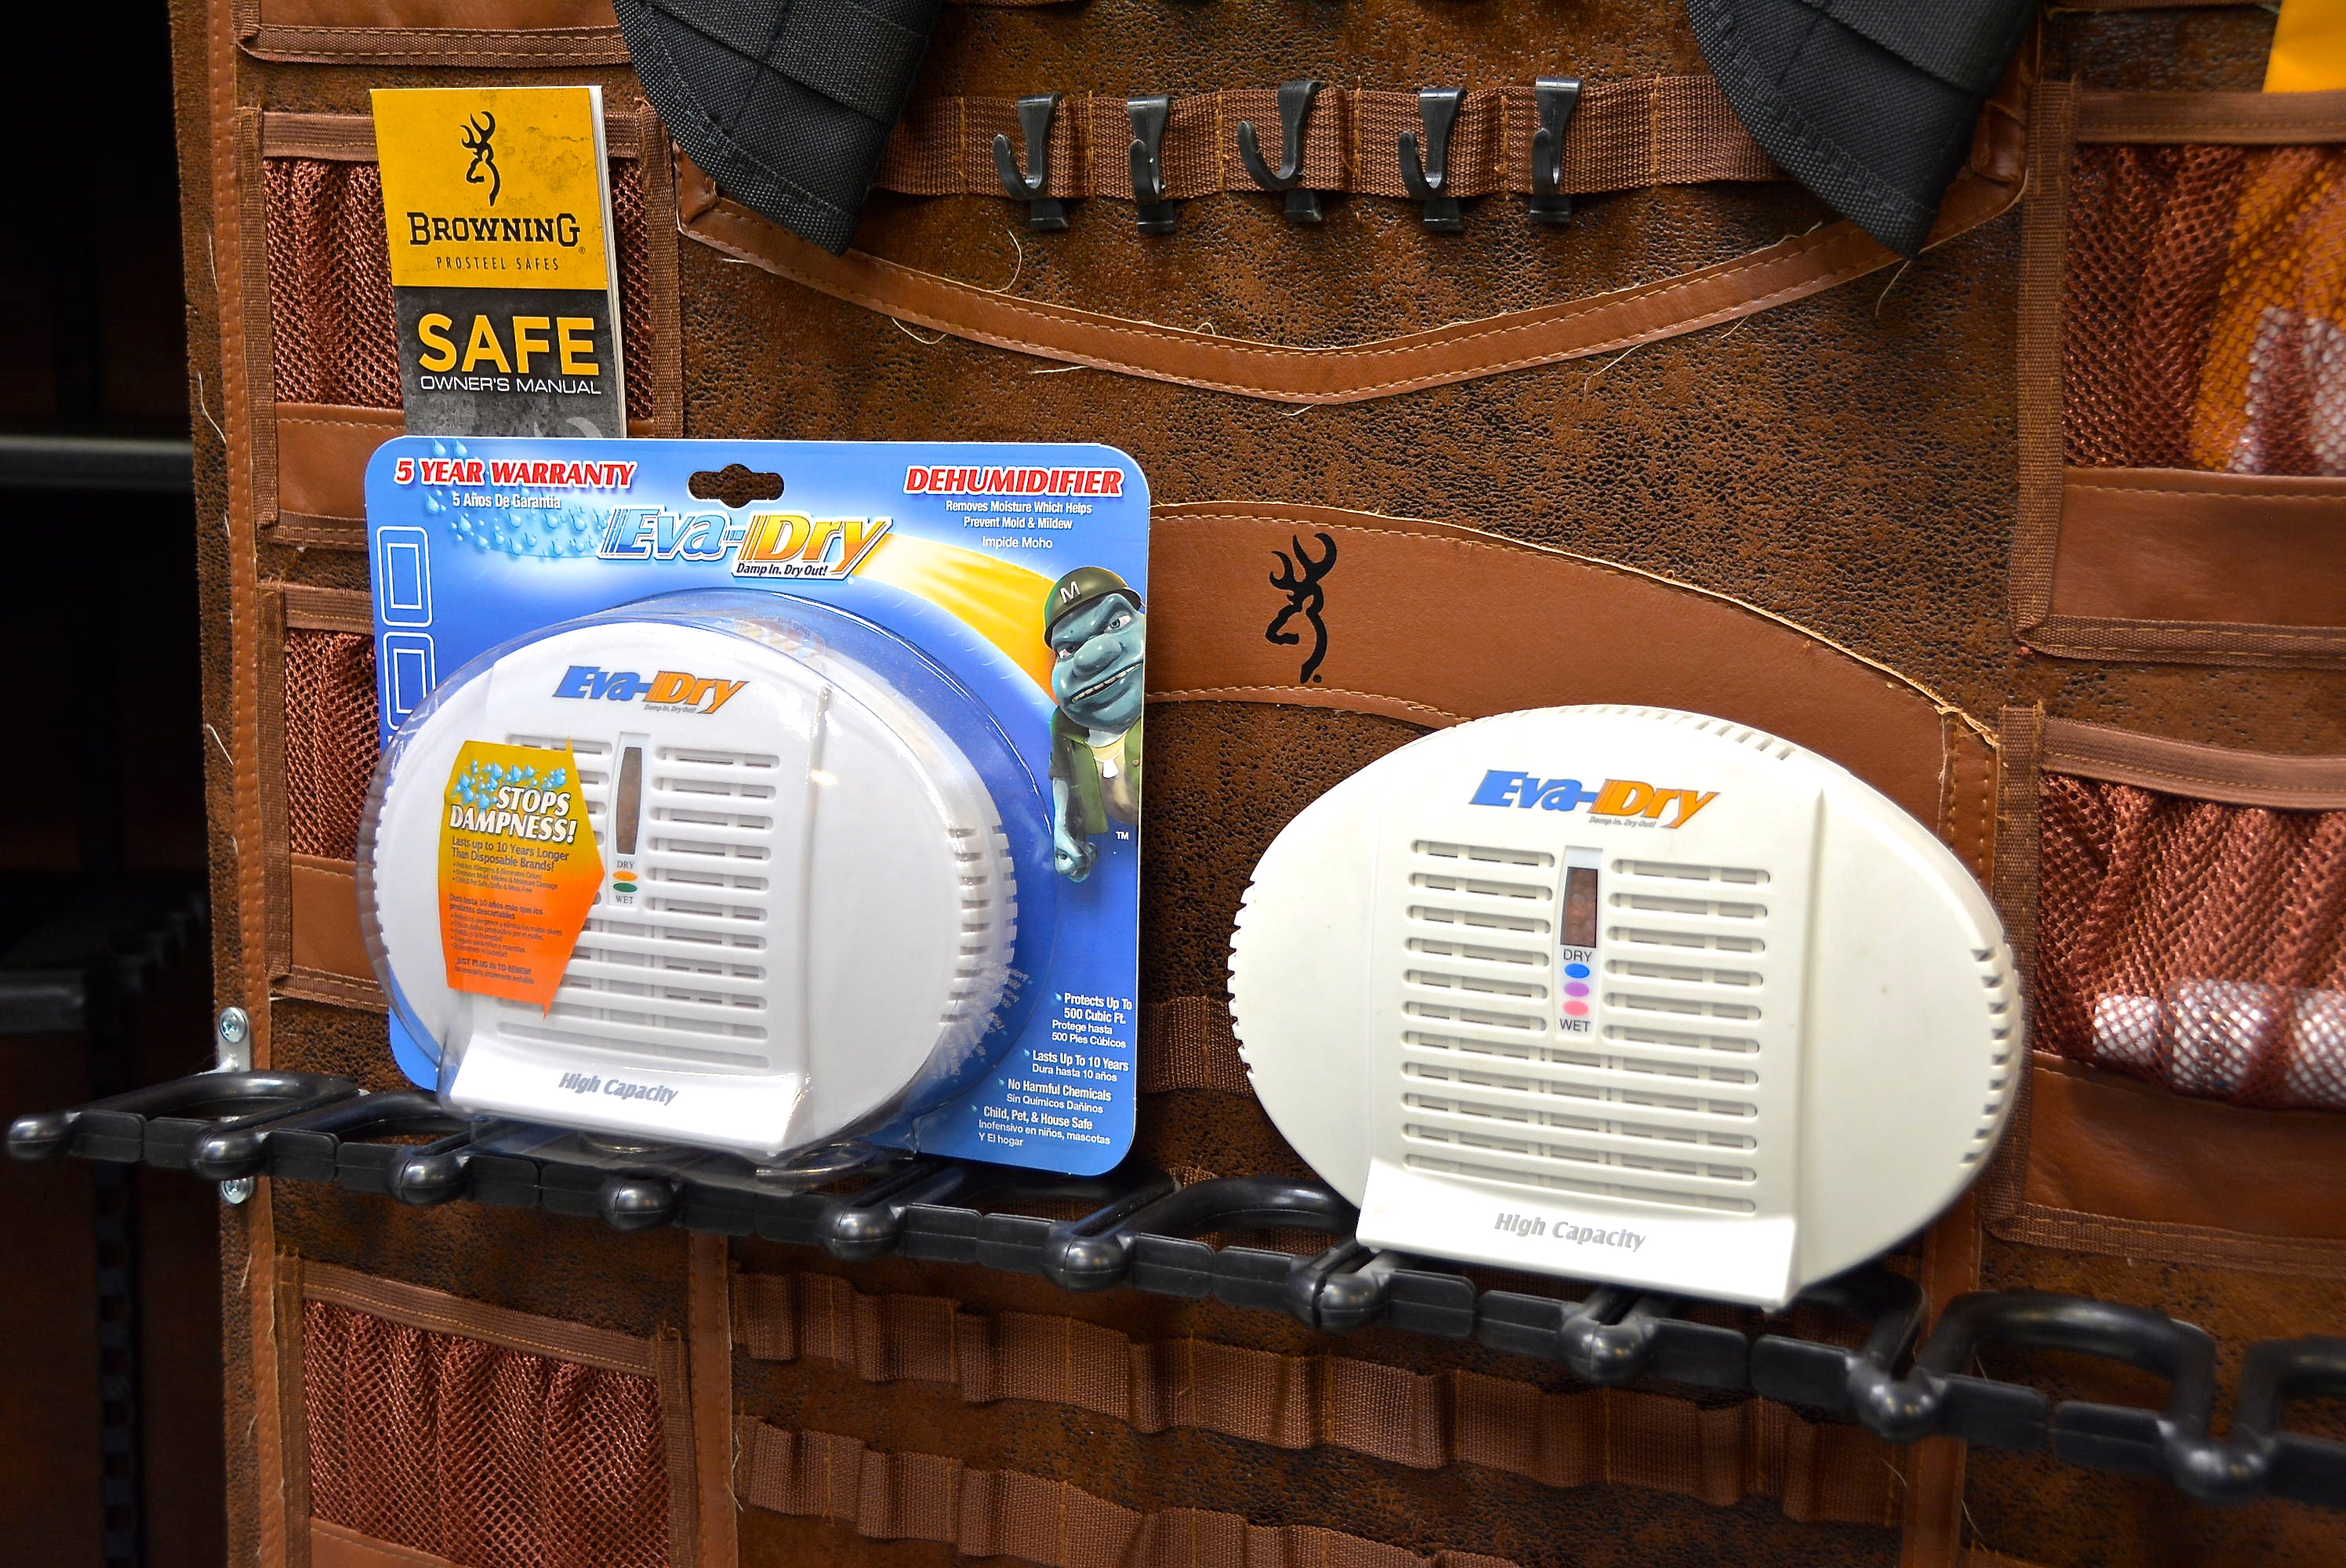 Liberty Safe Humidity and Temperature Monitor - Southeast Safes